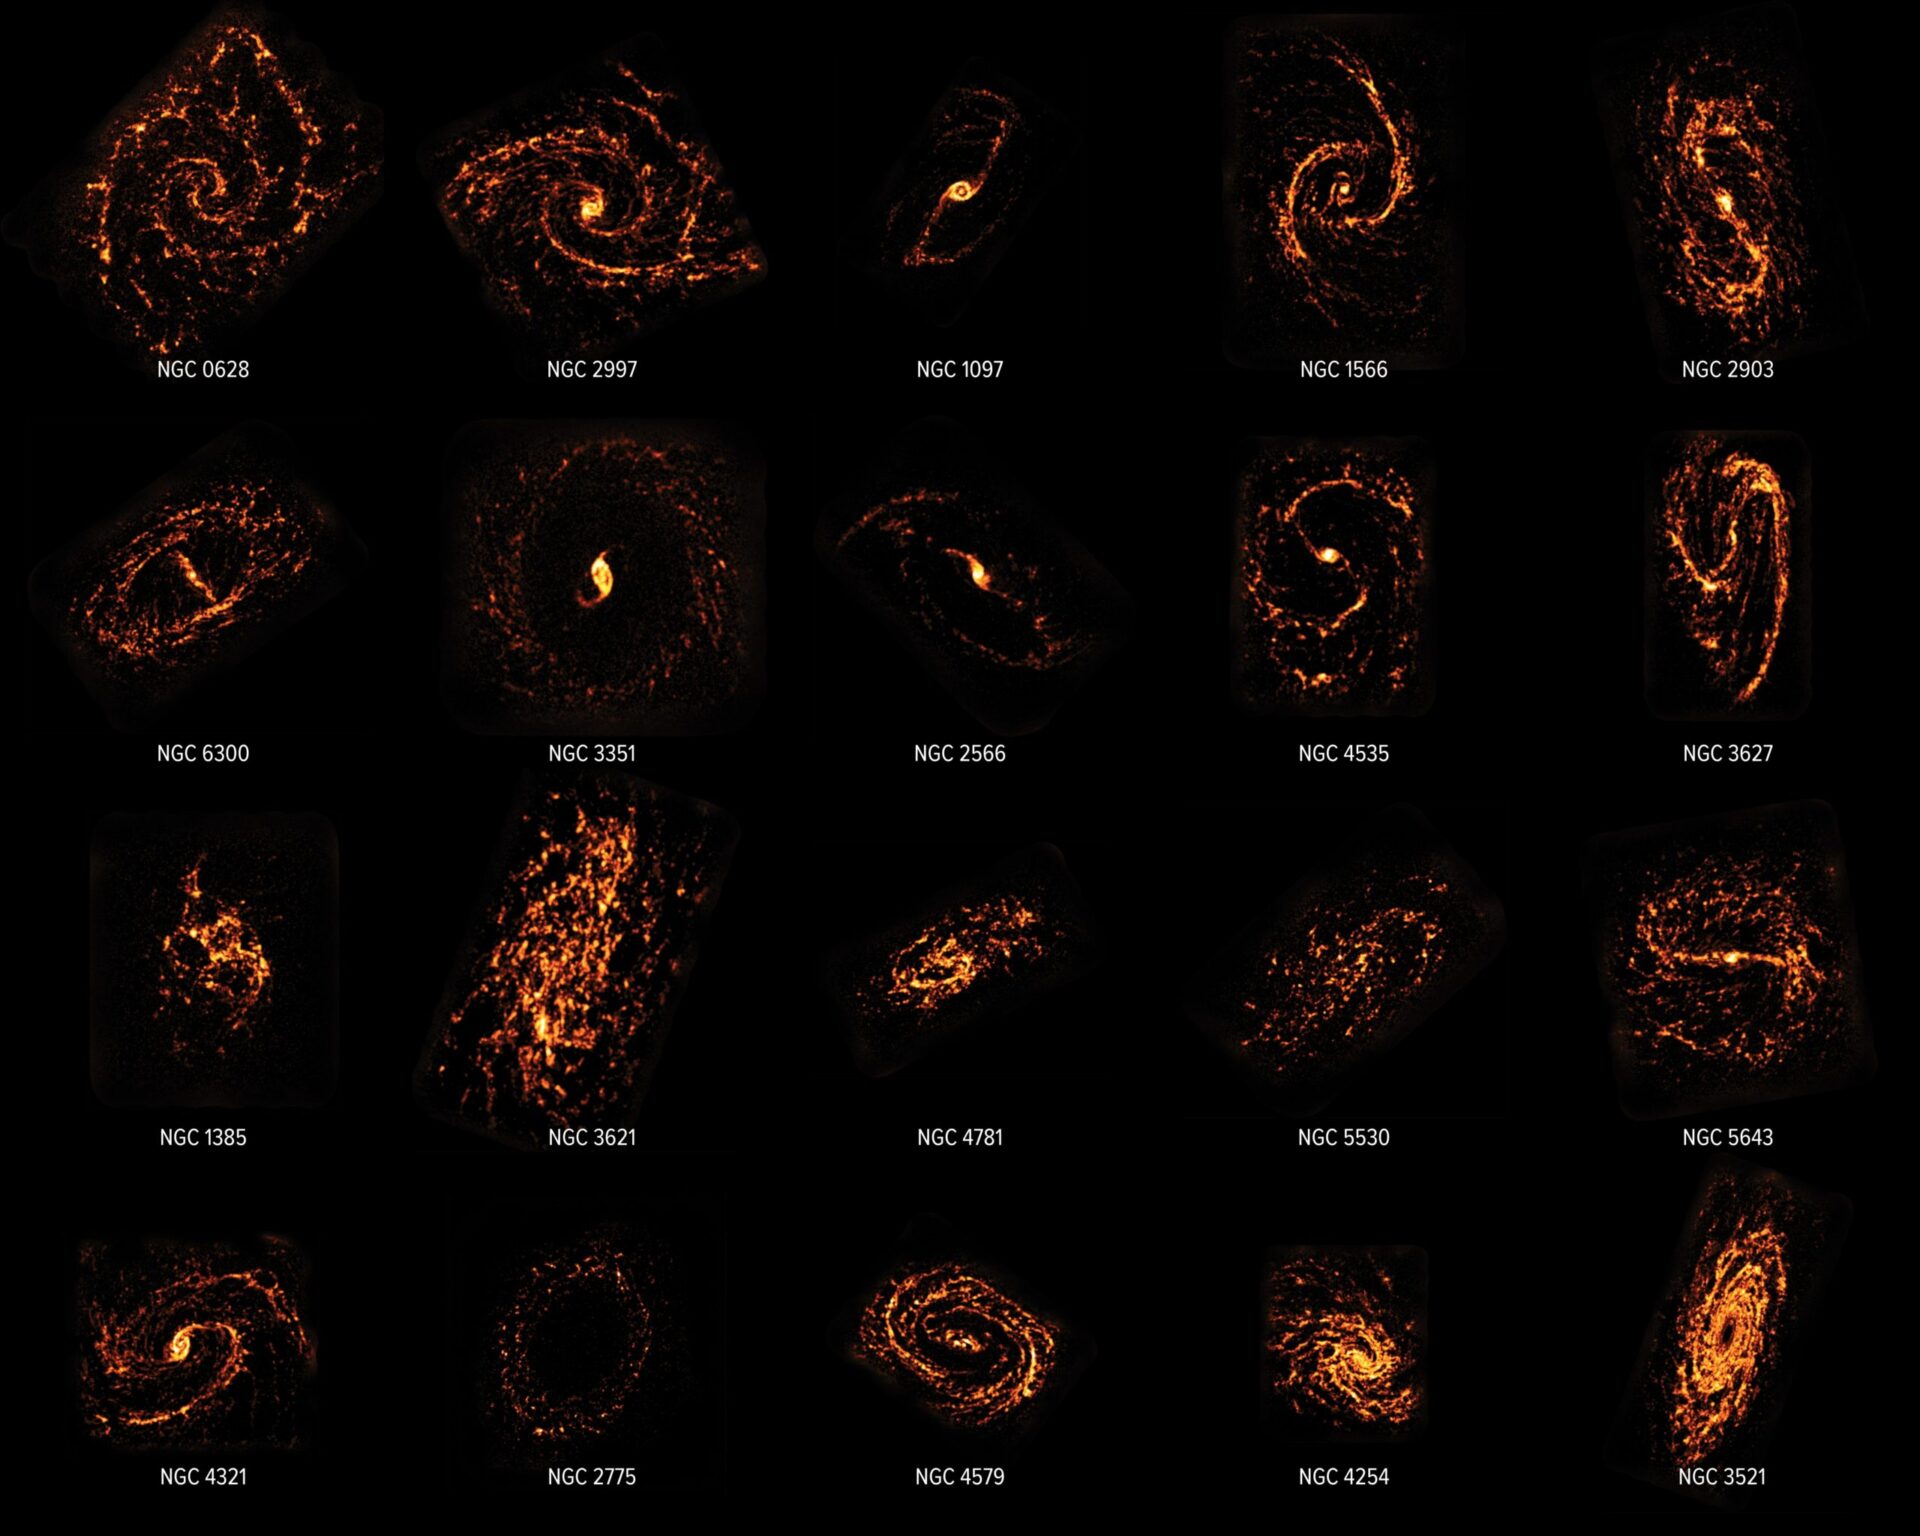 <p>Using the Atacama Large Millimeter/submillimeter Array (ALMA), scientists completed a census of nearly 100 galaxies in the nearby Universe, showcasing their behaviors and appearances. The scientists compared ALMA data to that of the Hubble Space Telescope, shown in composite here. The survey concluded that contrary to popular scientific opinion, stellar nurseries do not all look and act the same. In fact, as shown here, they are as different as the neighborhoods, cities, regions, and countries that make up our own world. Credit: ALMA (ESO/NAOJ/NRAO)/PHANGS, S. Dagnello (NRAO)</p>
